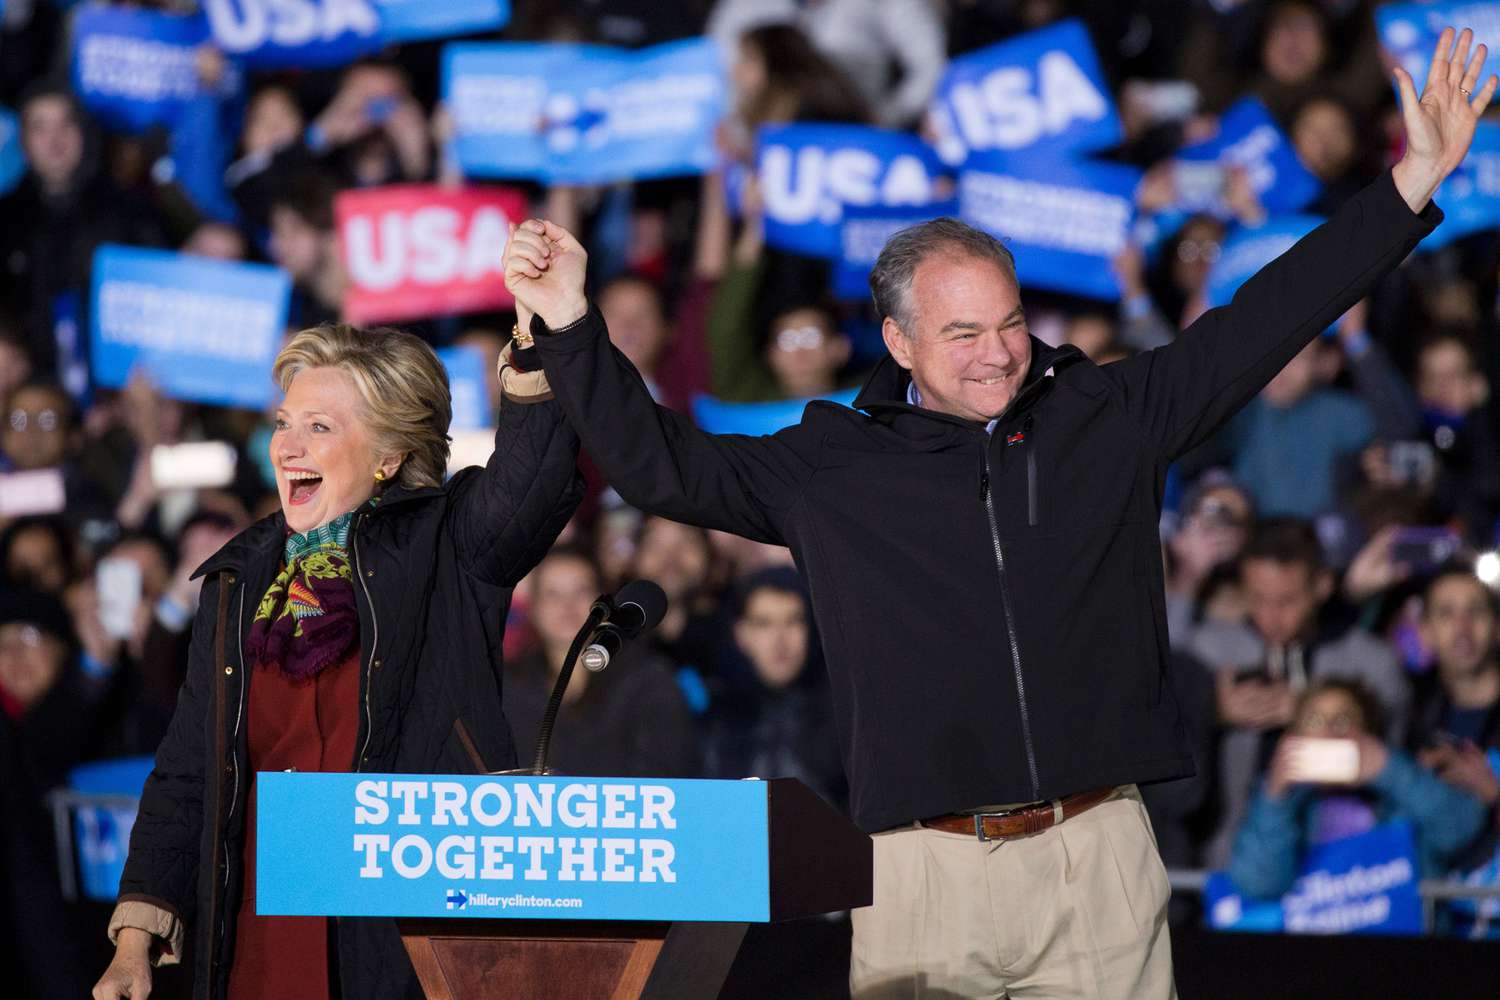 US Democratic presidential candidate Hillary Clinton and running mate Tim Kaine arrive for a rally in Philadelphia, Pennsylvania on October 22, 2016.